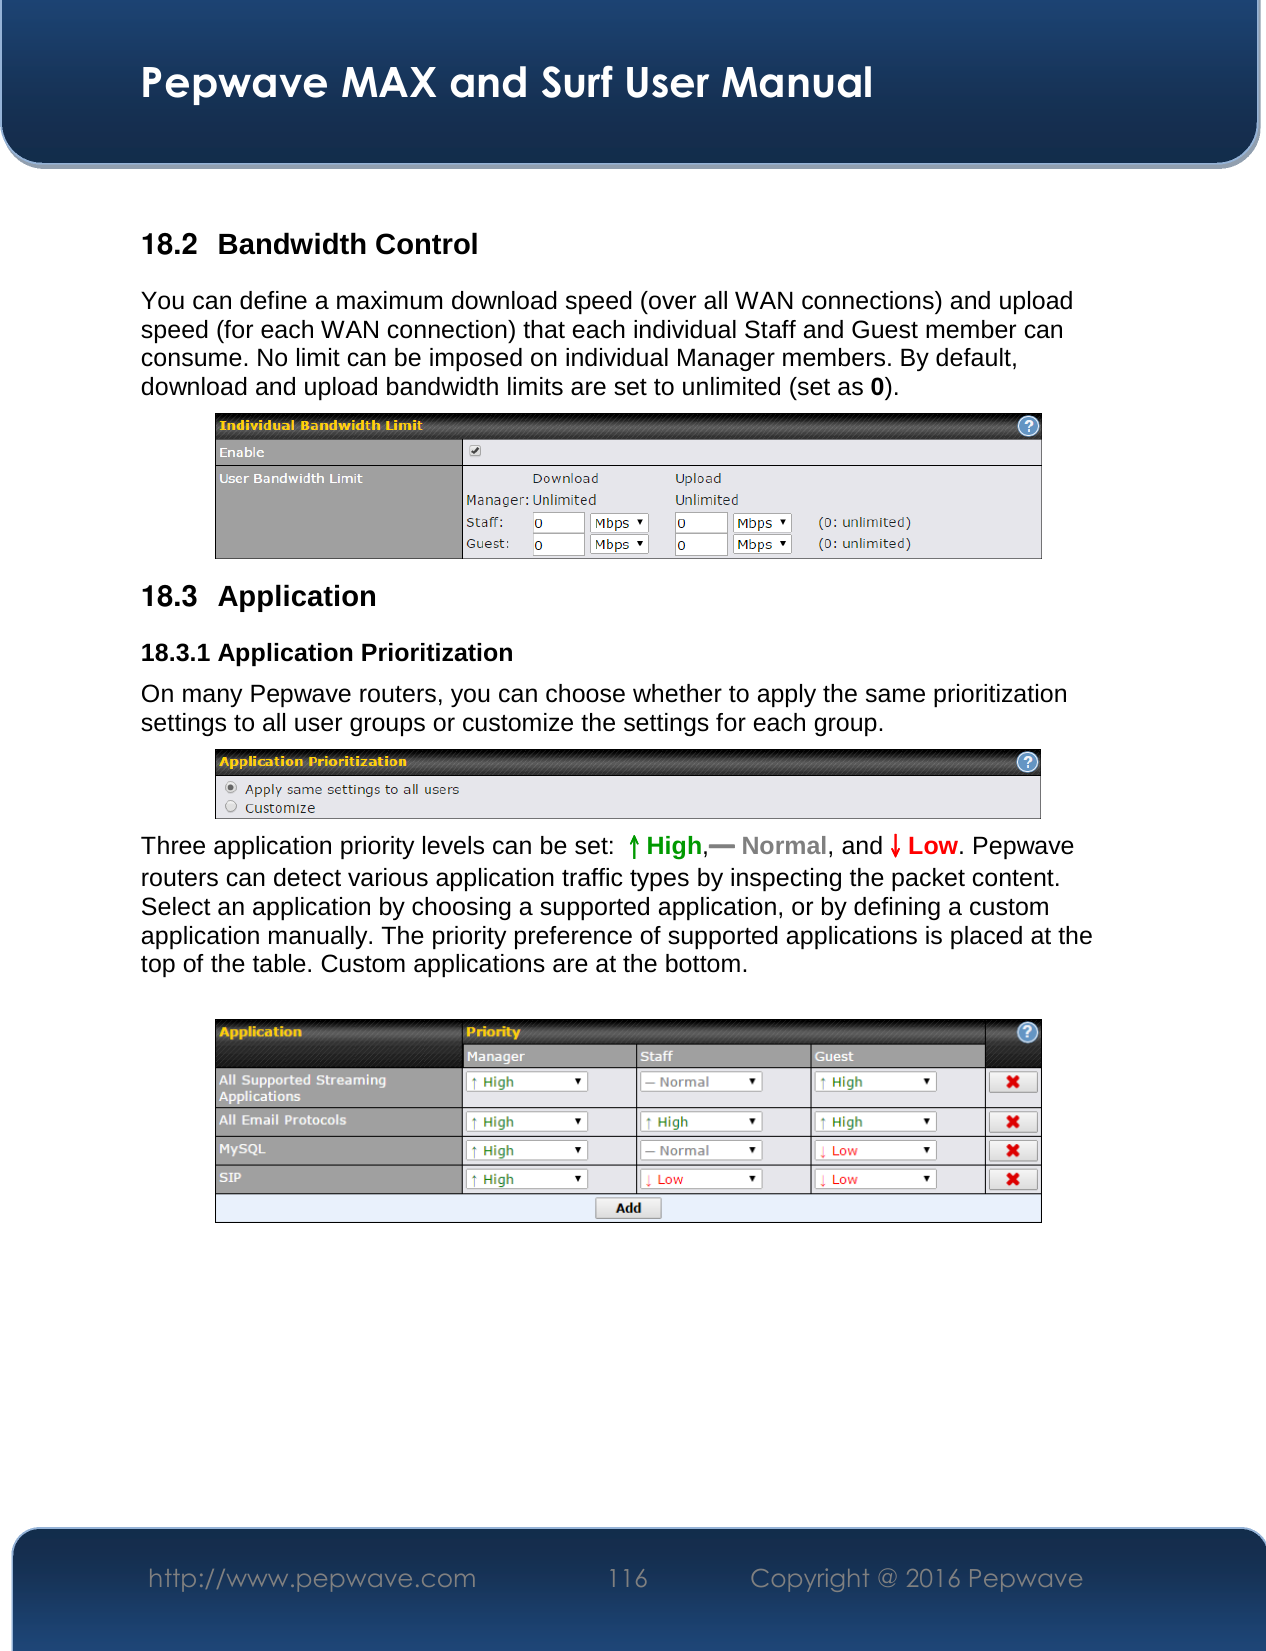  Pepwave MAX and Surf User Manual http://www.pepwave.com  116    Copyright @ 2016 Pepwave    18.2  Bandwidth Control You can define a maximum download speed (over all WAN connections) and upload speed (for each WAN connection) that each individual Staff and Guest member can consume. No limit can be imposed on individual Manager members. By default, download and upload bandwidth limits are set to unlimited (set as 0).  18.3  Application 18.3.1 Application Prioritization On many Pepwave routers, you can choose whether to apply the same prioritization settings to all user groups or customize the settings for each group.   Three application priority levels can be set: ↑↑↑↑High,━━━━ Normal, and↓↓↓↓Low. Pepwave routers can detect various application traffic types by inspecting the packet content. Select an application by choosing a supported application, or by defining a custom application manually. The priority preference of supported applications is placed at the top of the table. Custom applications are at the bottom.       